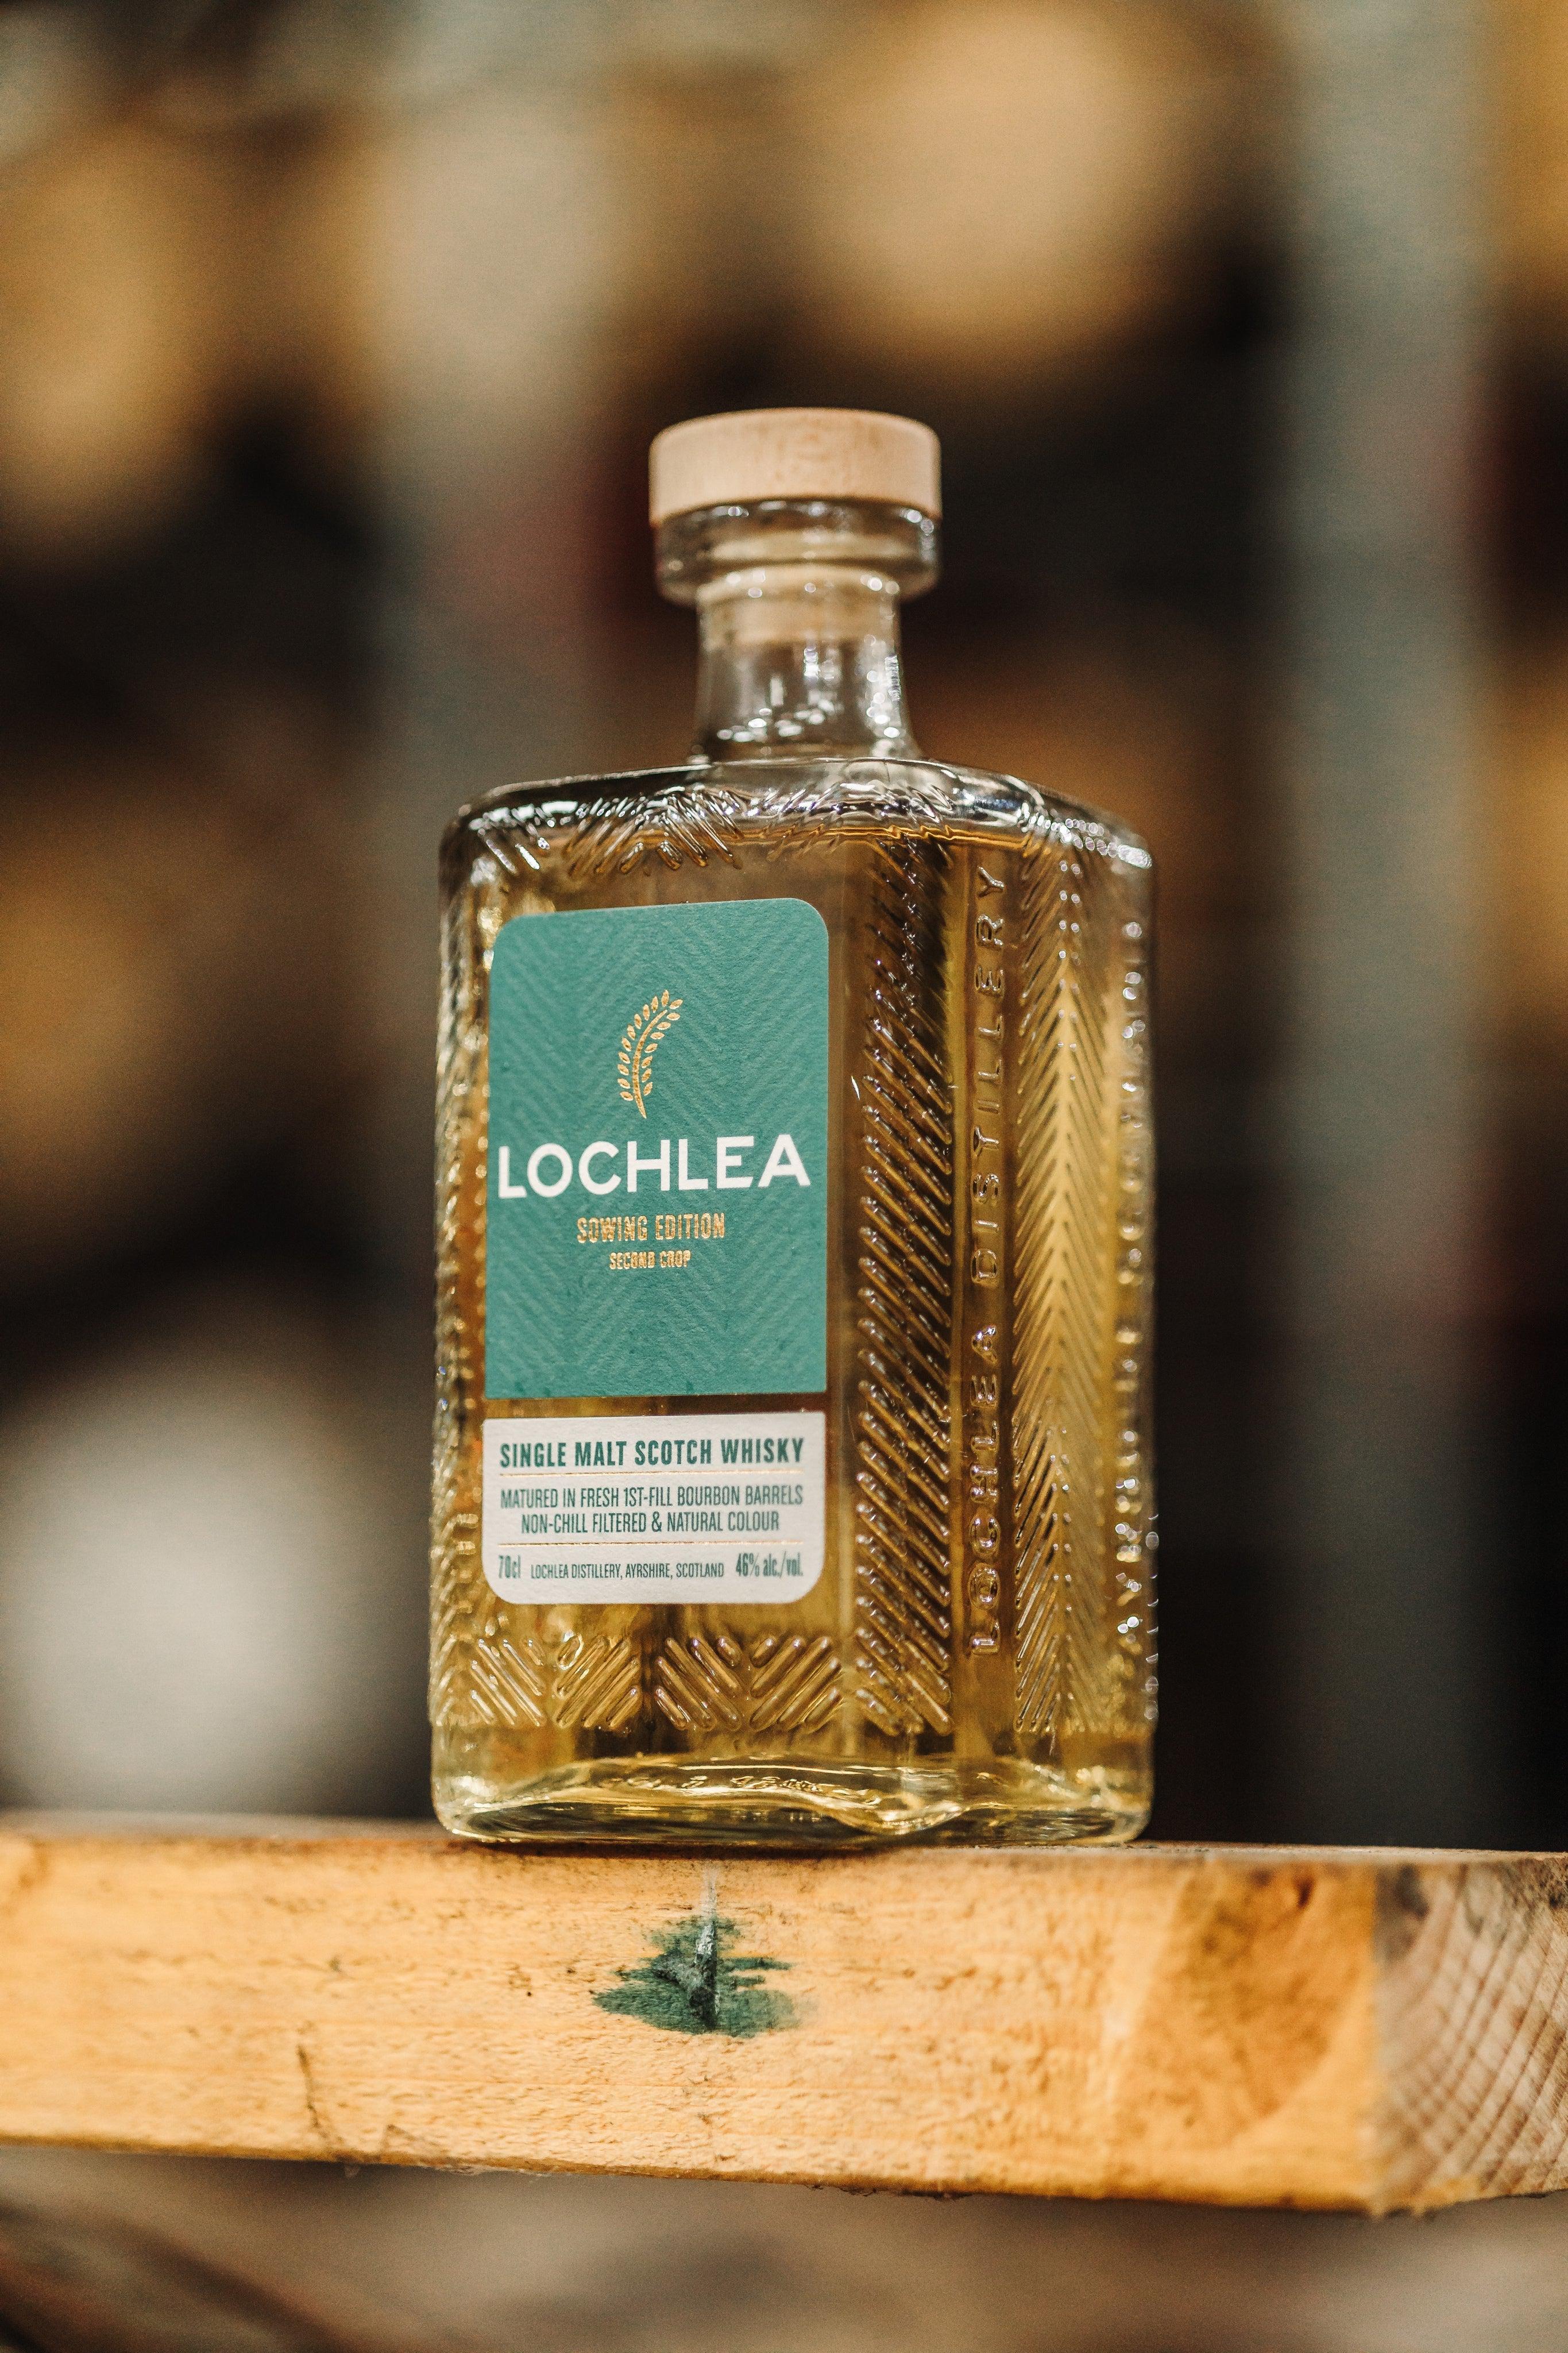 Lochlea, Sowing Edition - Second Crop Whisky